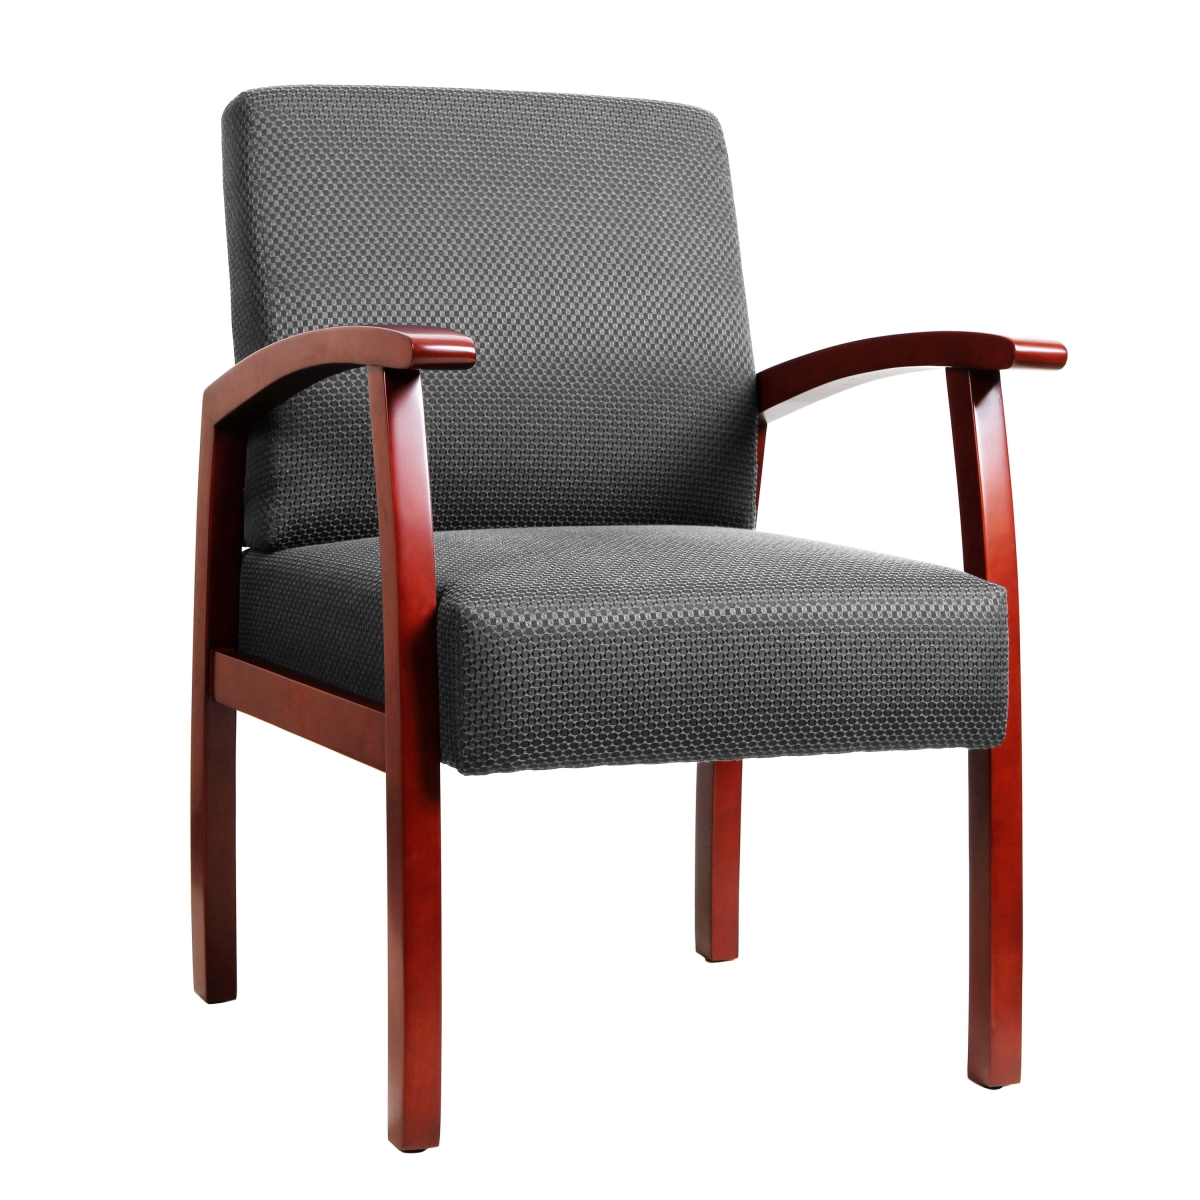 Tyfc2326 Mid Back Fabric Guest Chair - Cherry